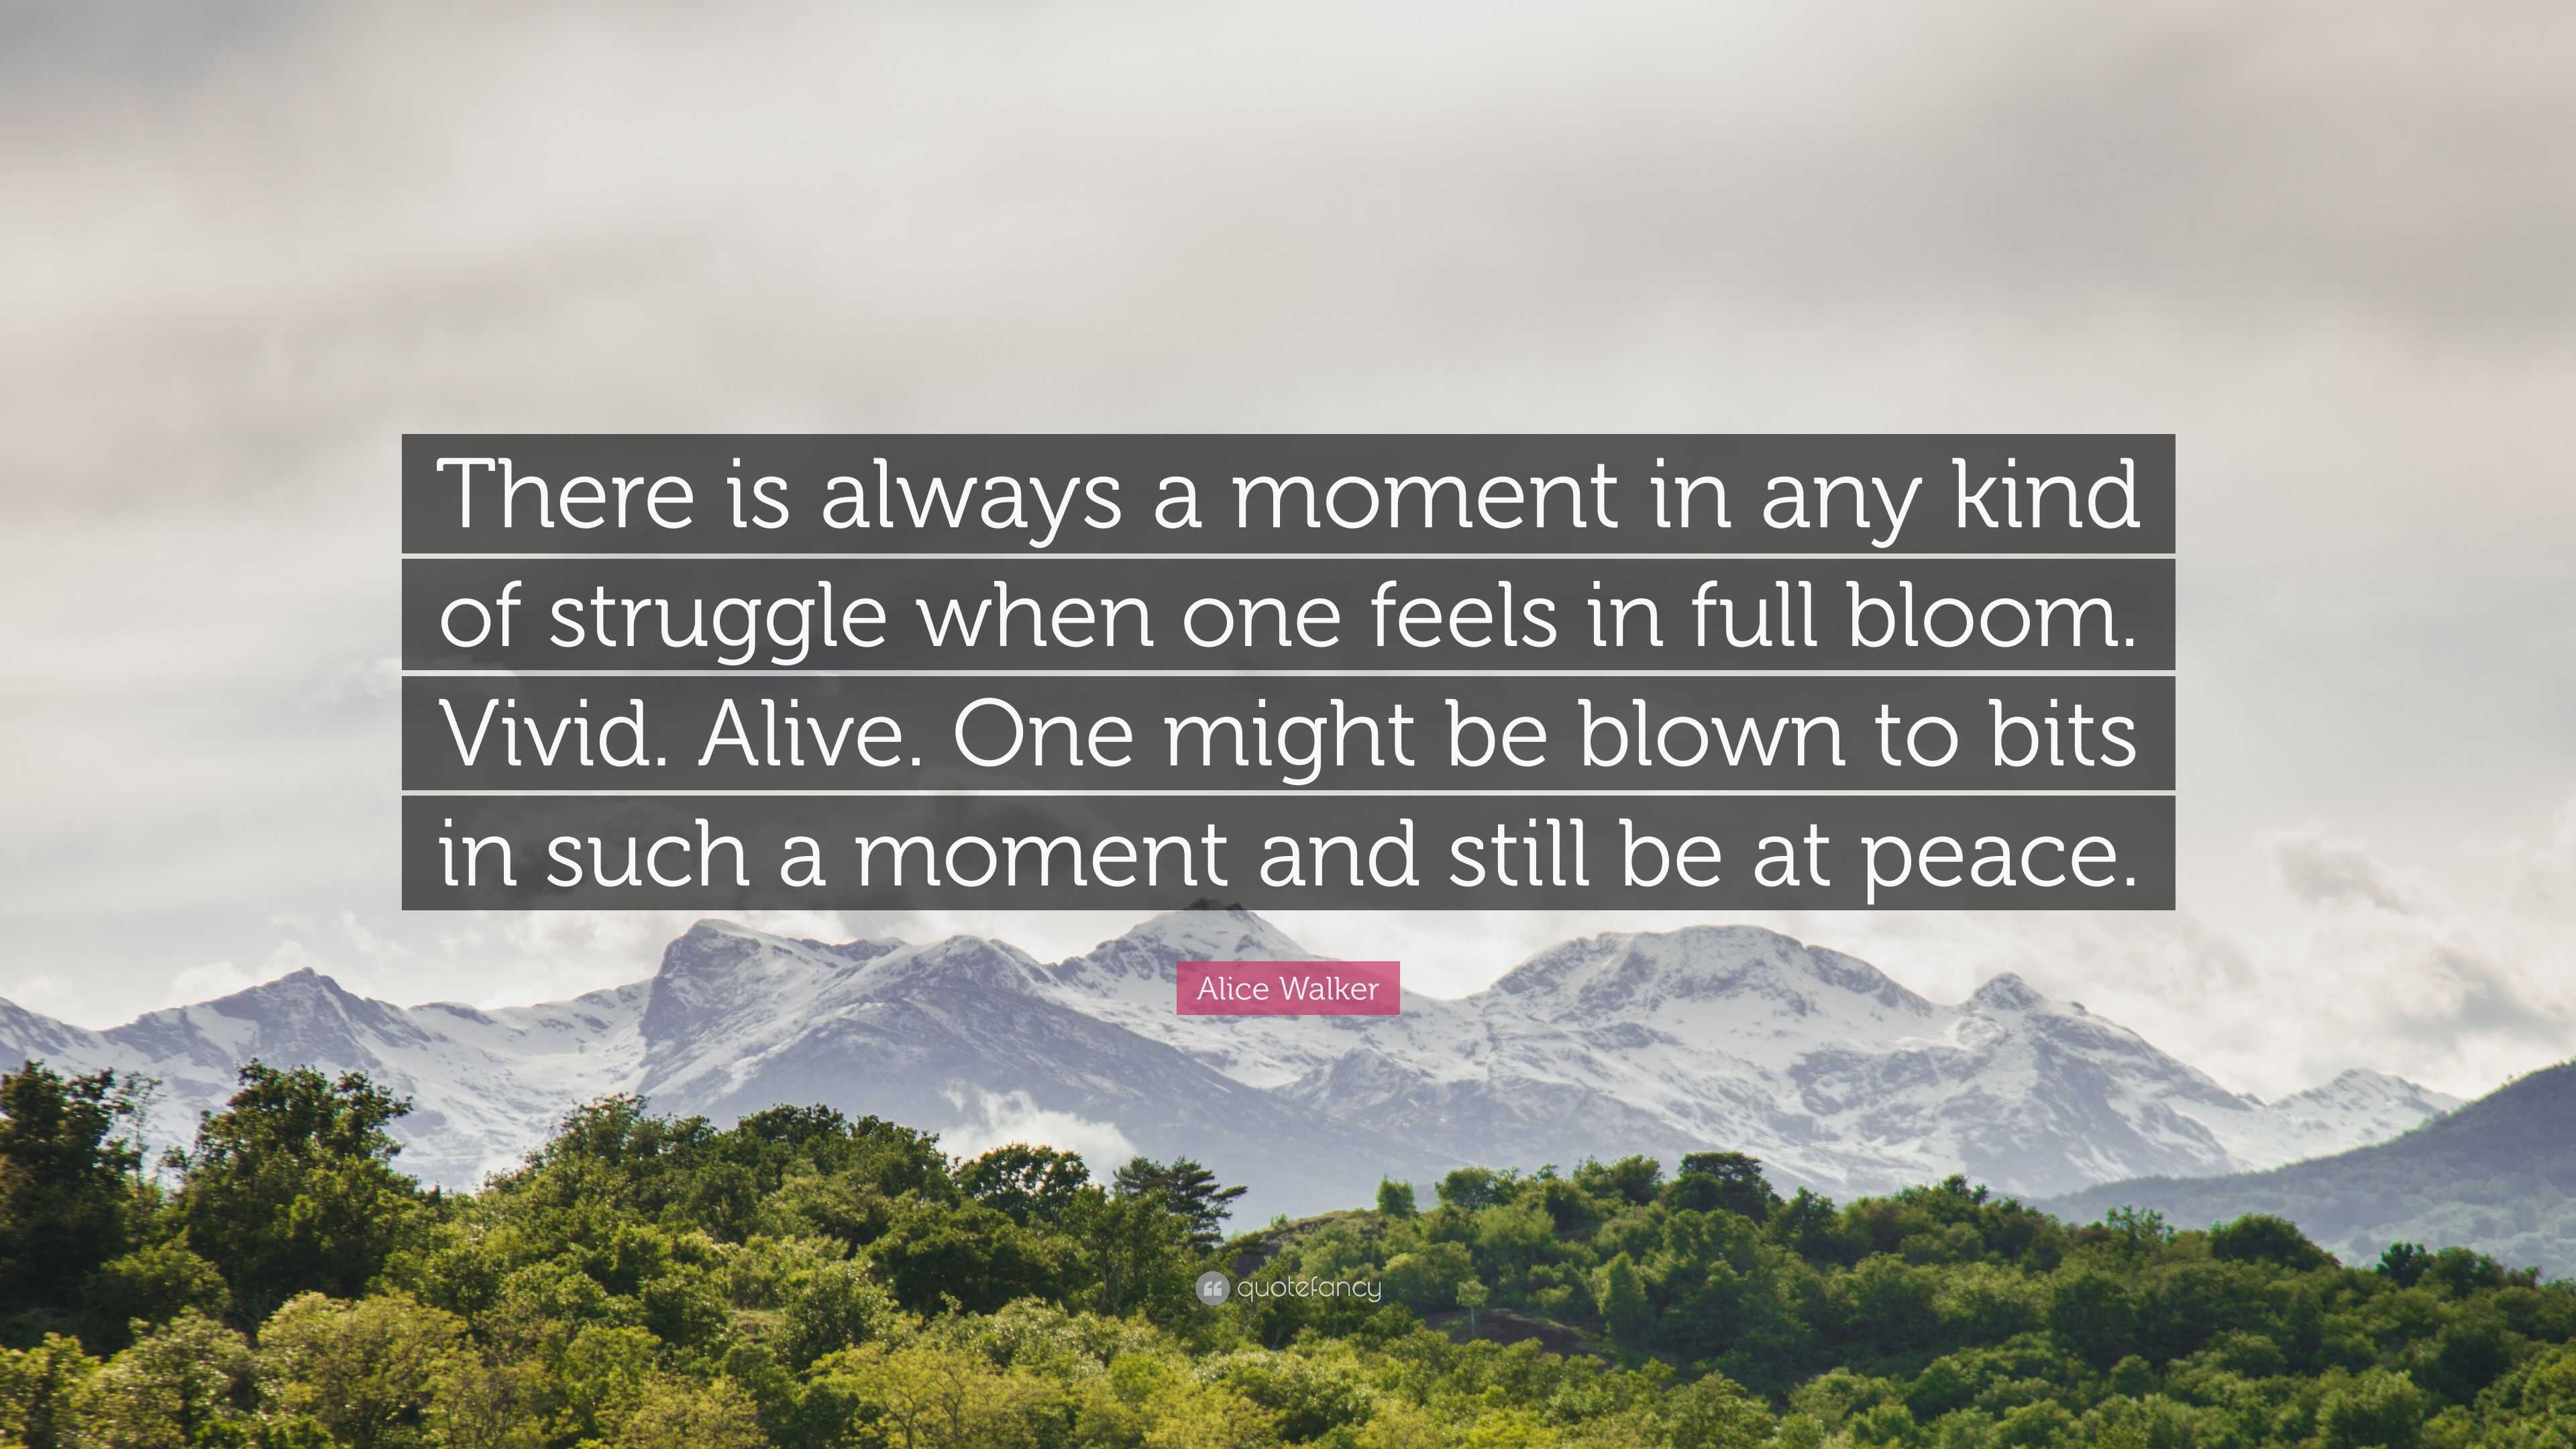 Alice Walker Quote: “There is always a moment in any kind of struggle ...